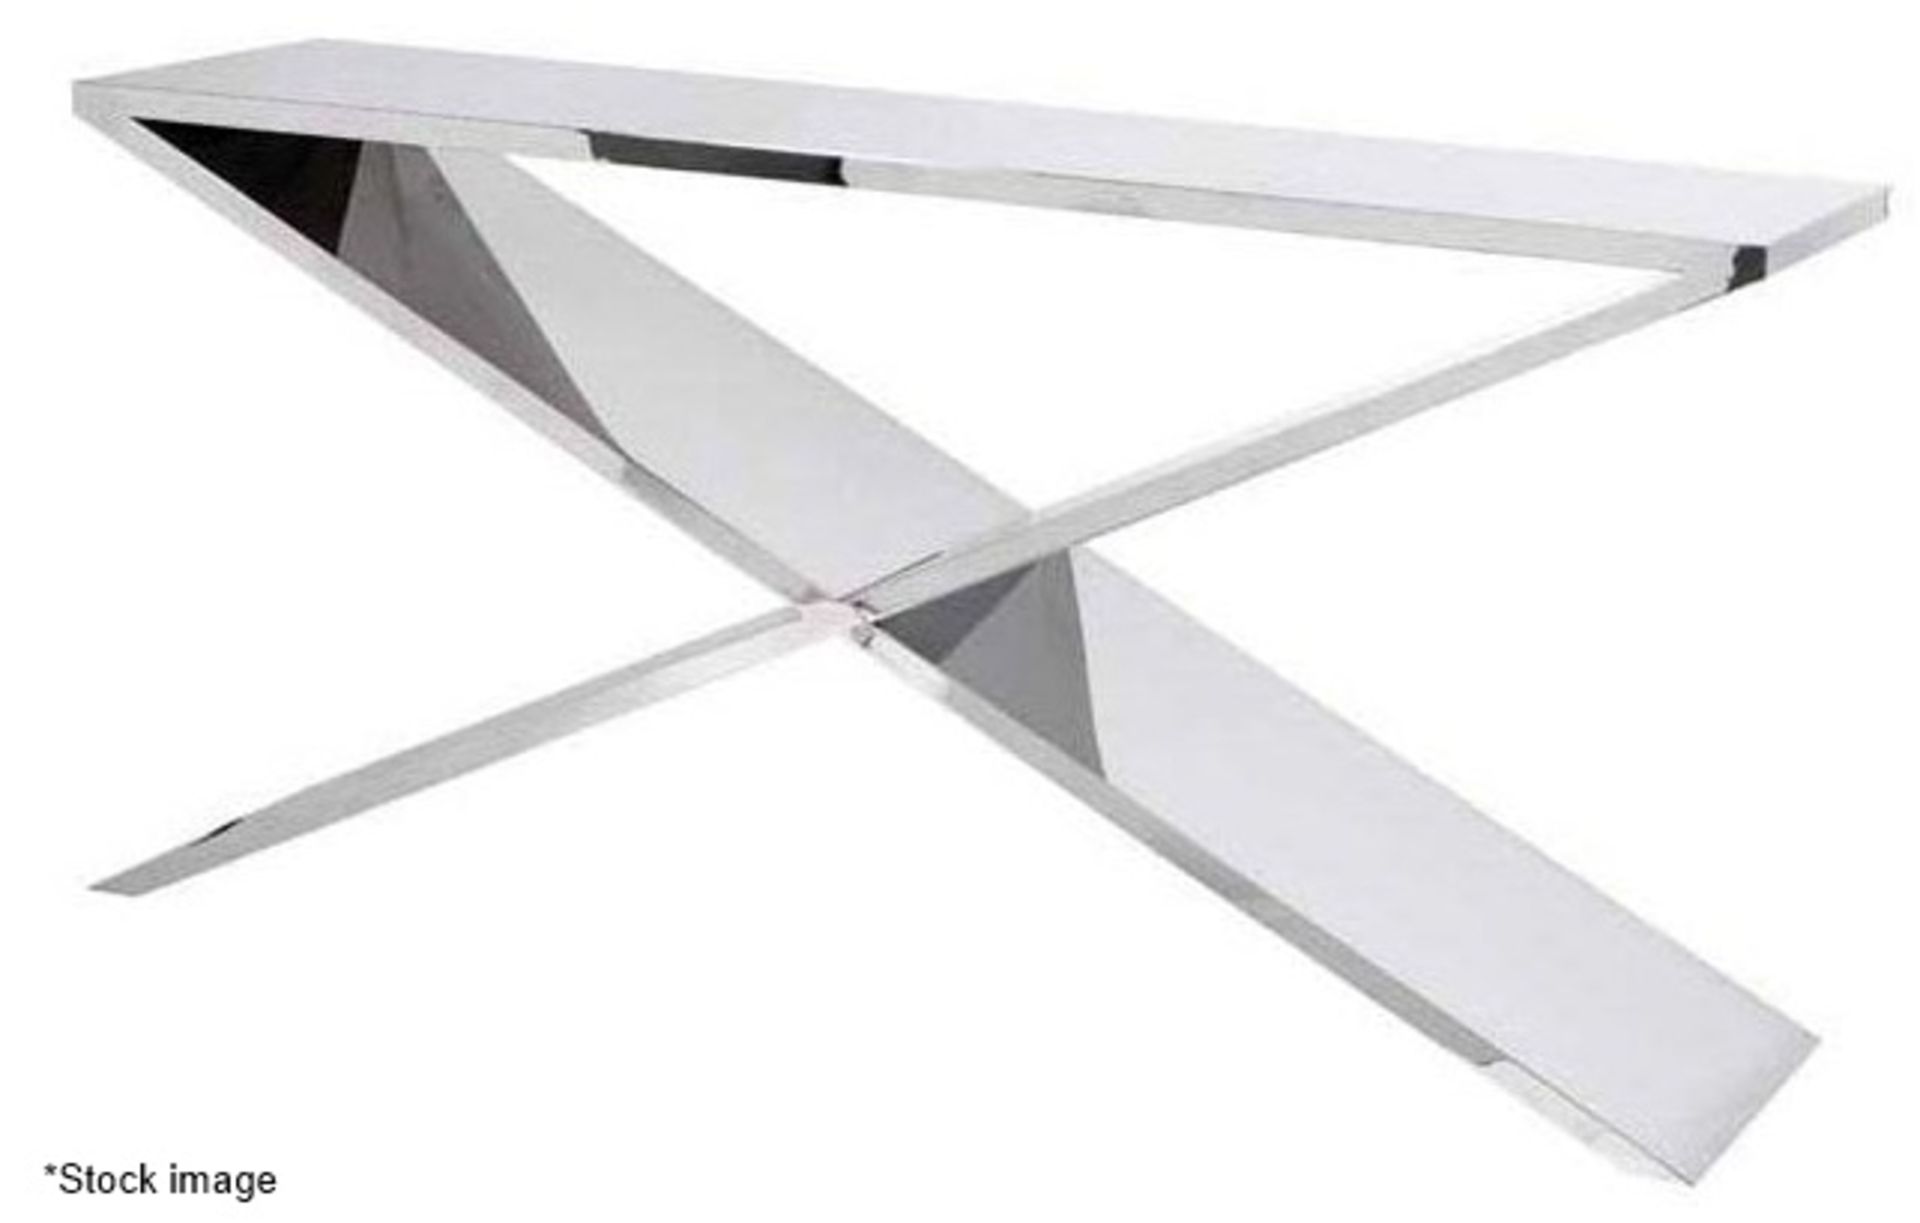 1 x EICHHOLTZ 'Metropole' Luxury Handcrafted Mirrored Console Table - Original Price £2,810 - Image 2 of 10